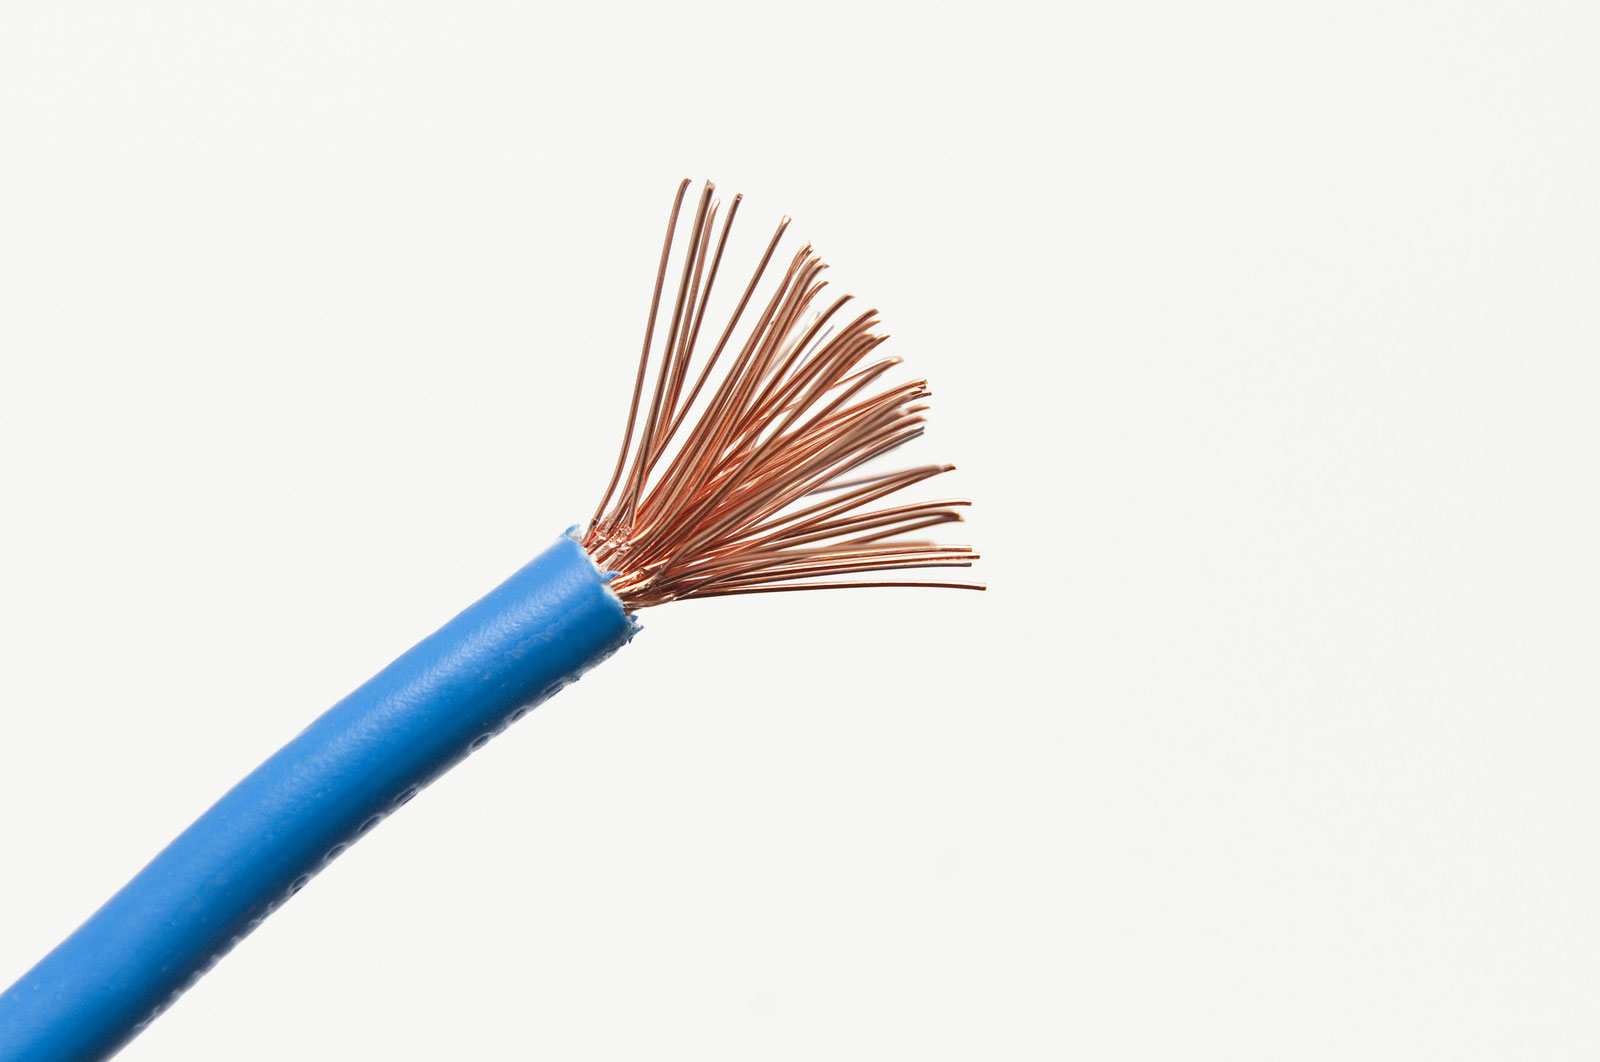 A stranded electrical power cable